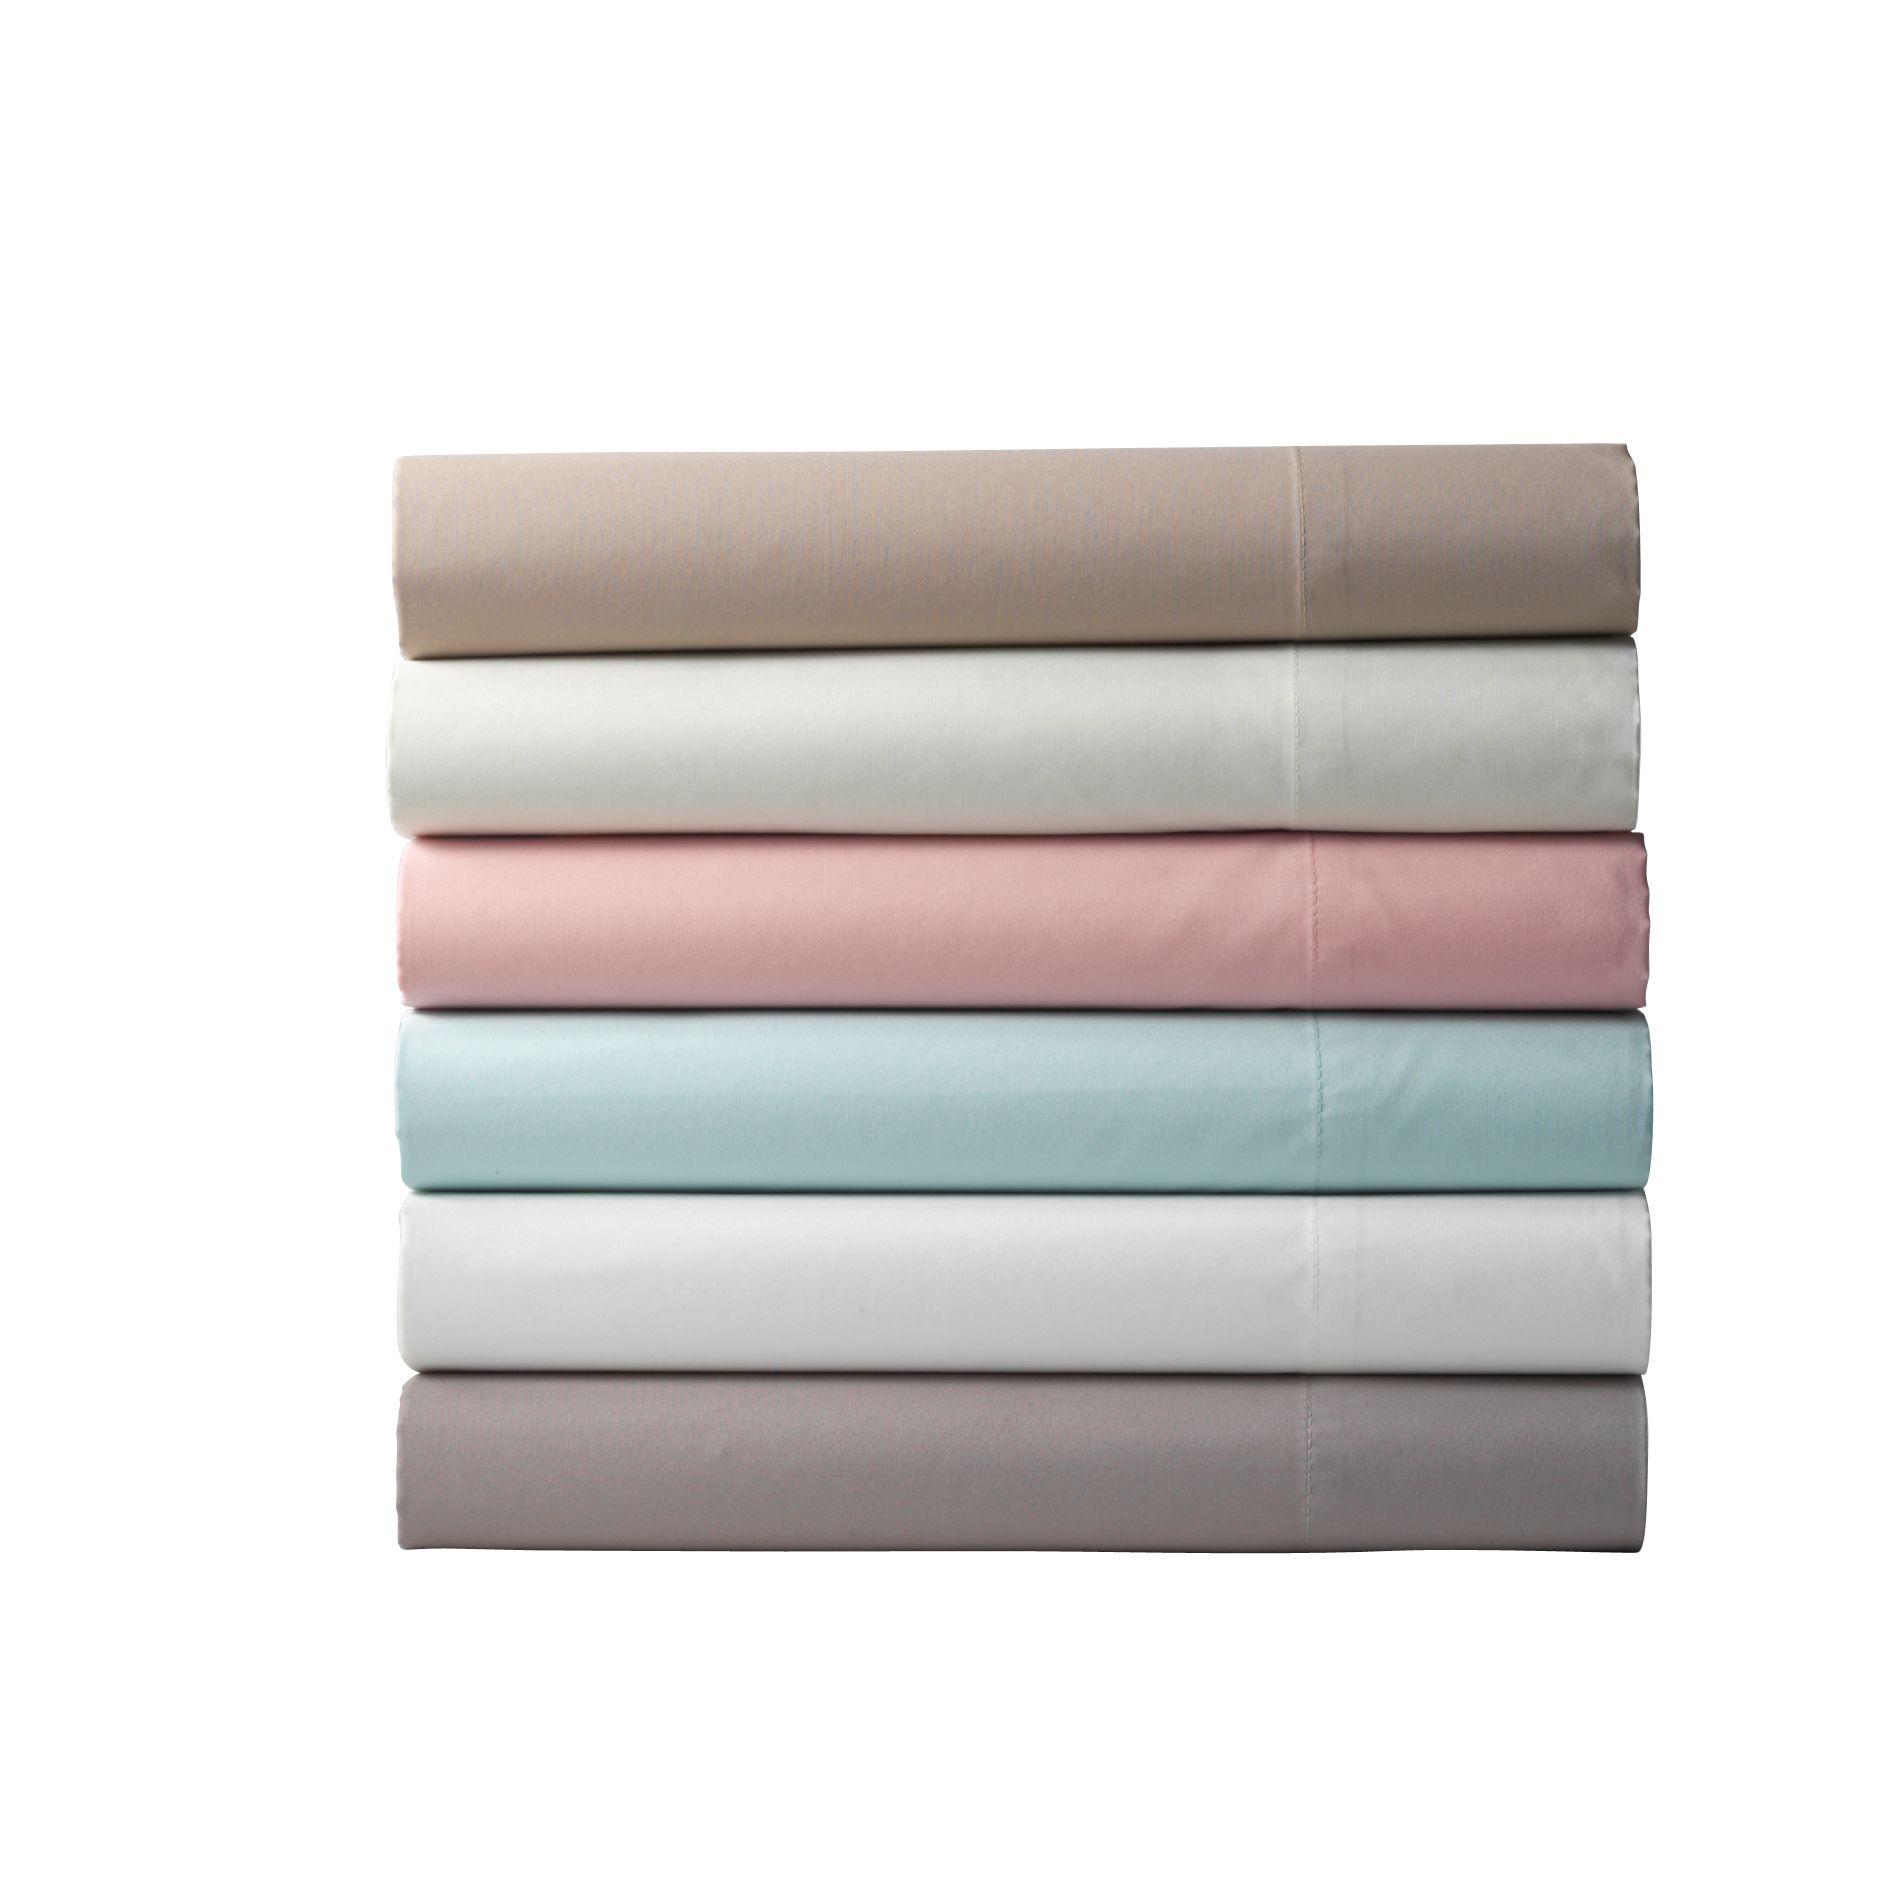 Jaclyn Smith 300 Thread Count Wrinkle Free Sheet Set - Home - Bed ...